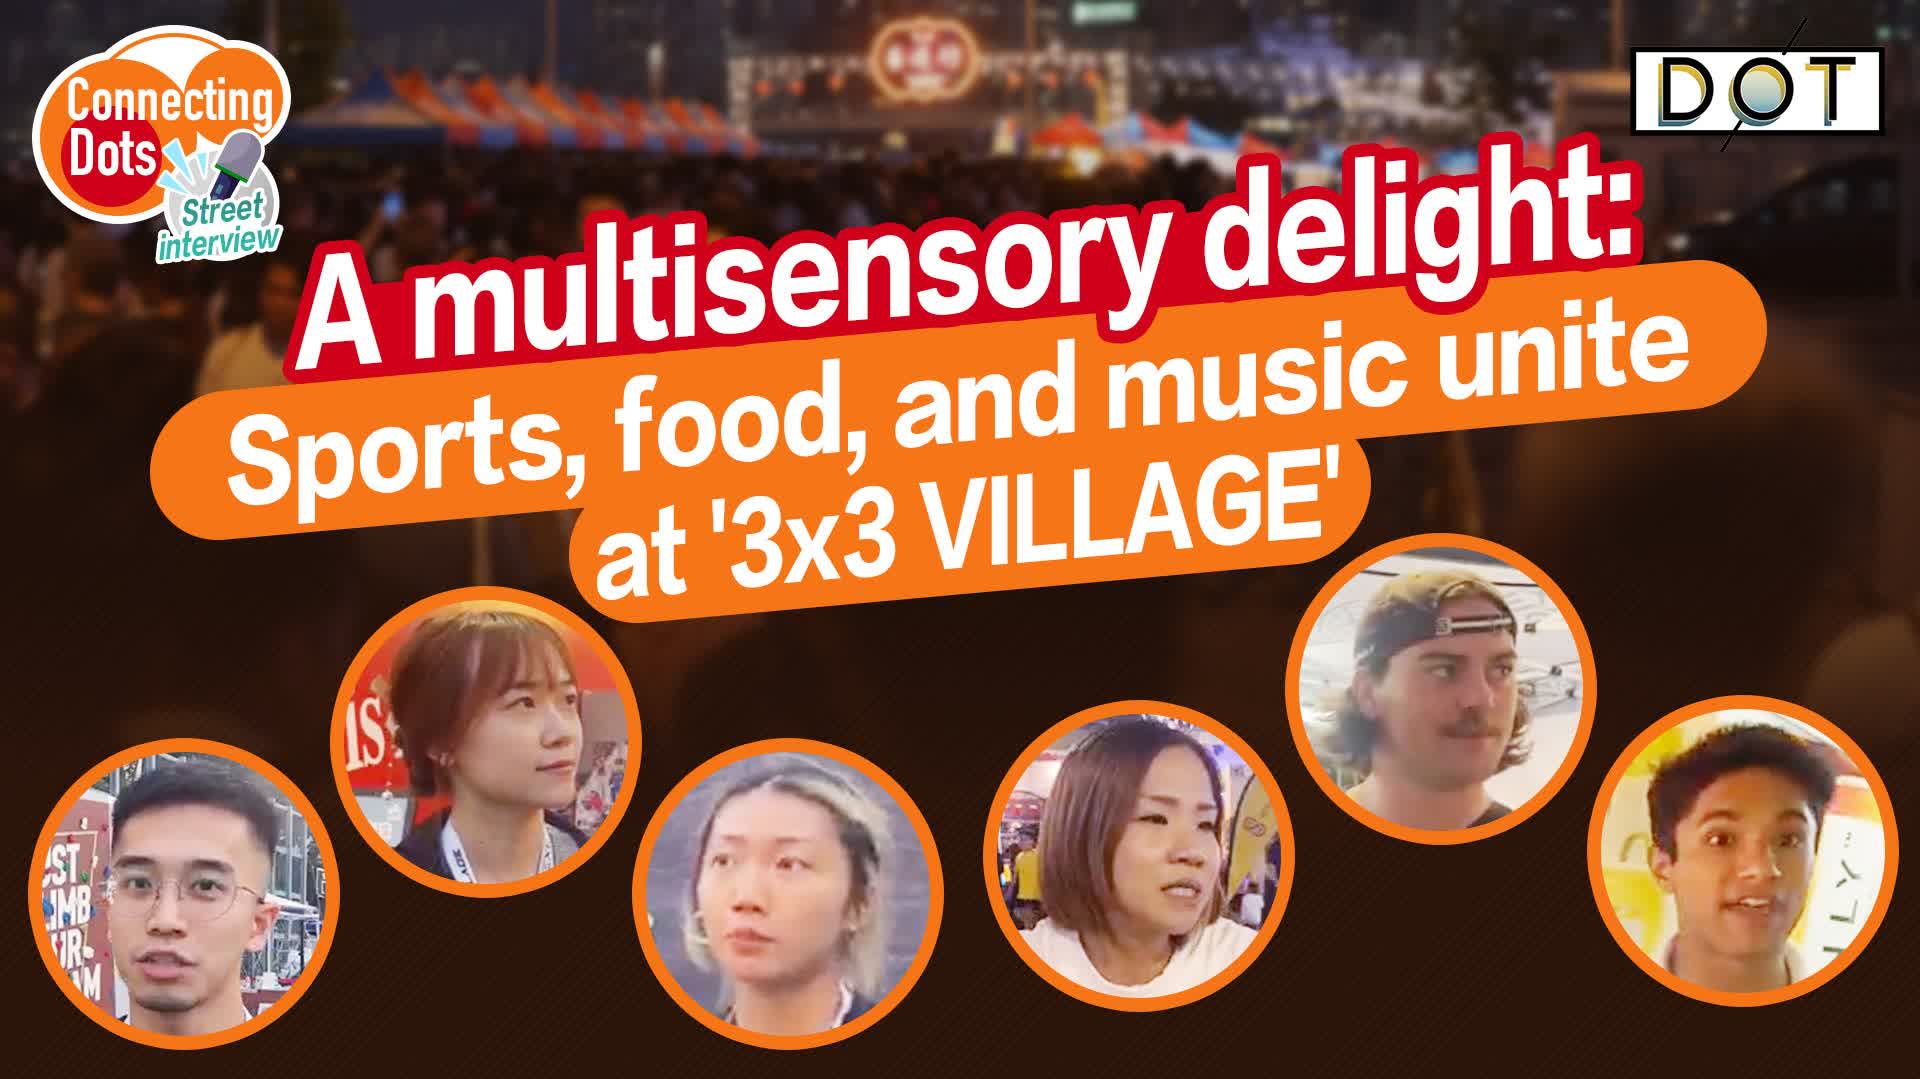 Connecting Dots | A multisensory delight: Sports, food, and music unite at '3x3 VILLAGE'